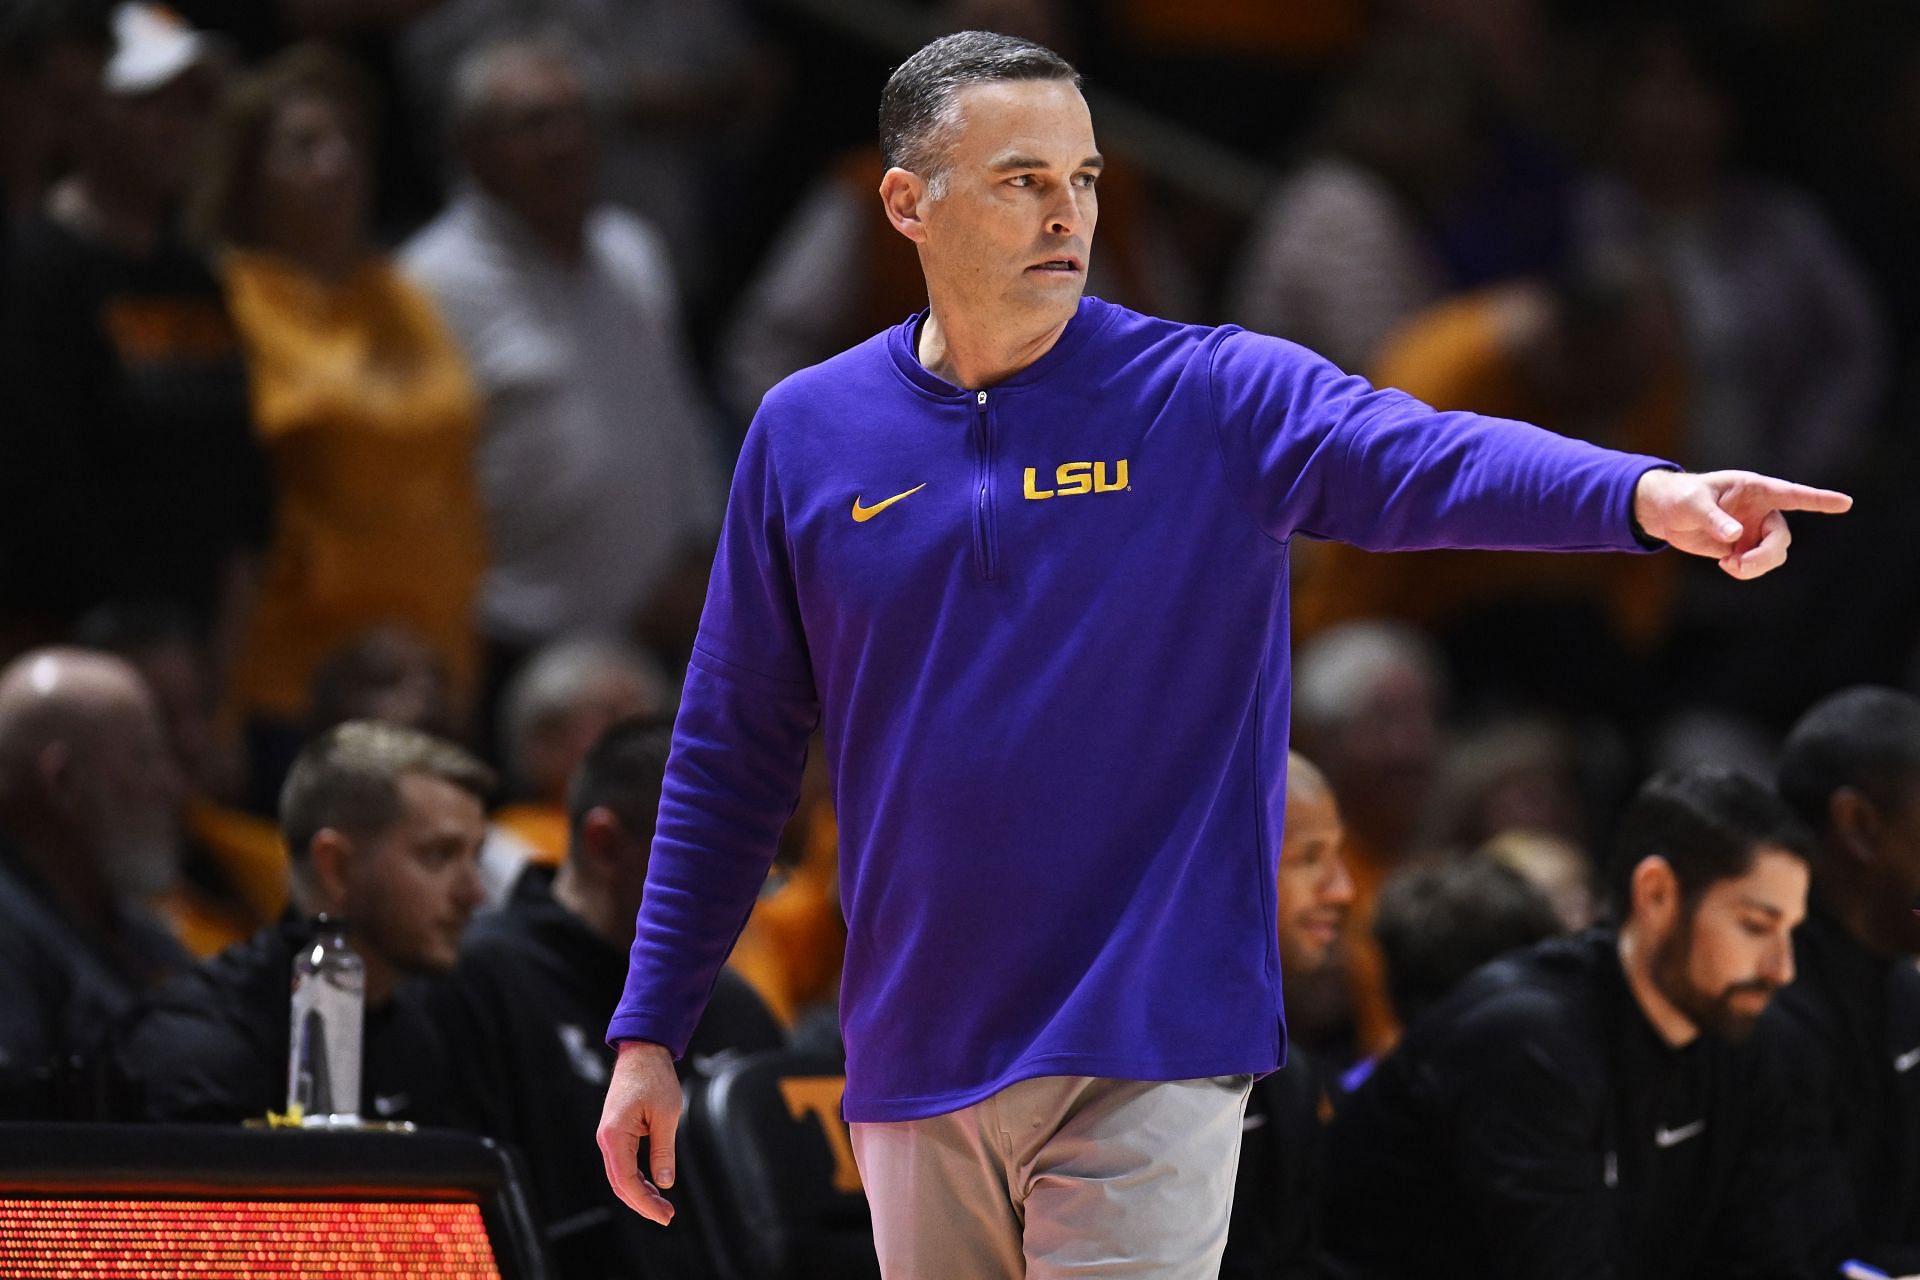 LSU coach Matt McMahon boasts recent wins over South Carolina and Kentucky. Mississippi State is a big matchup for his Tigers.